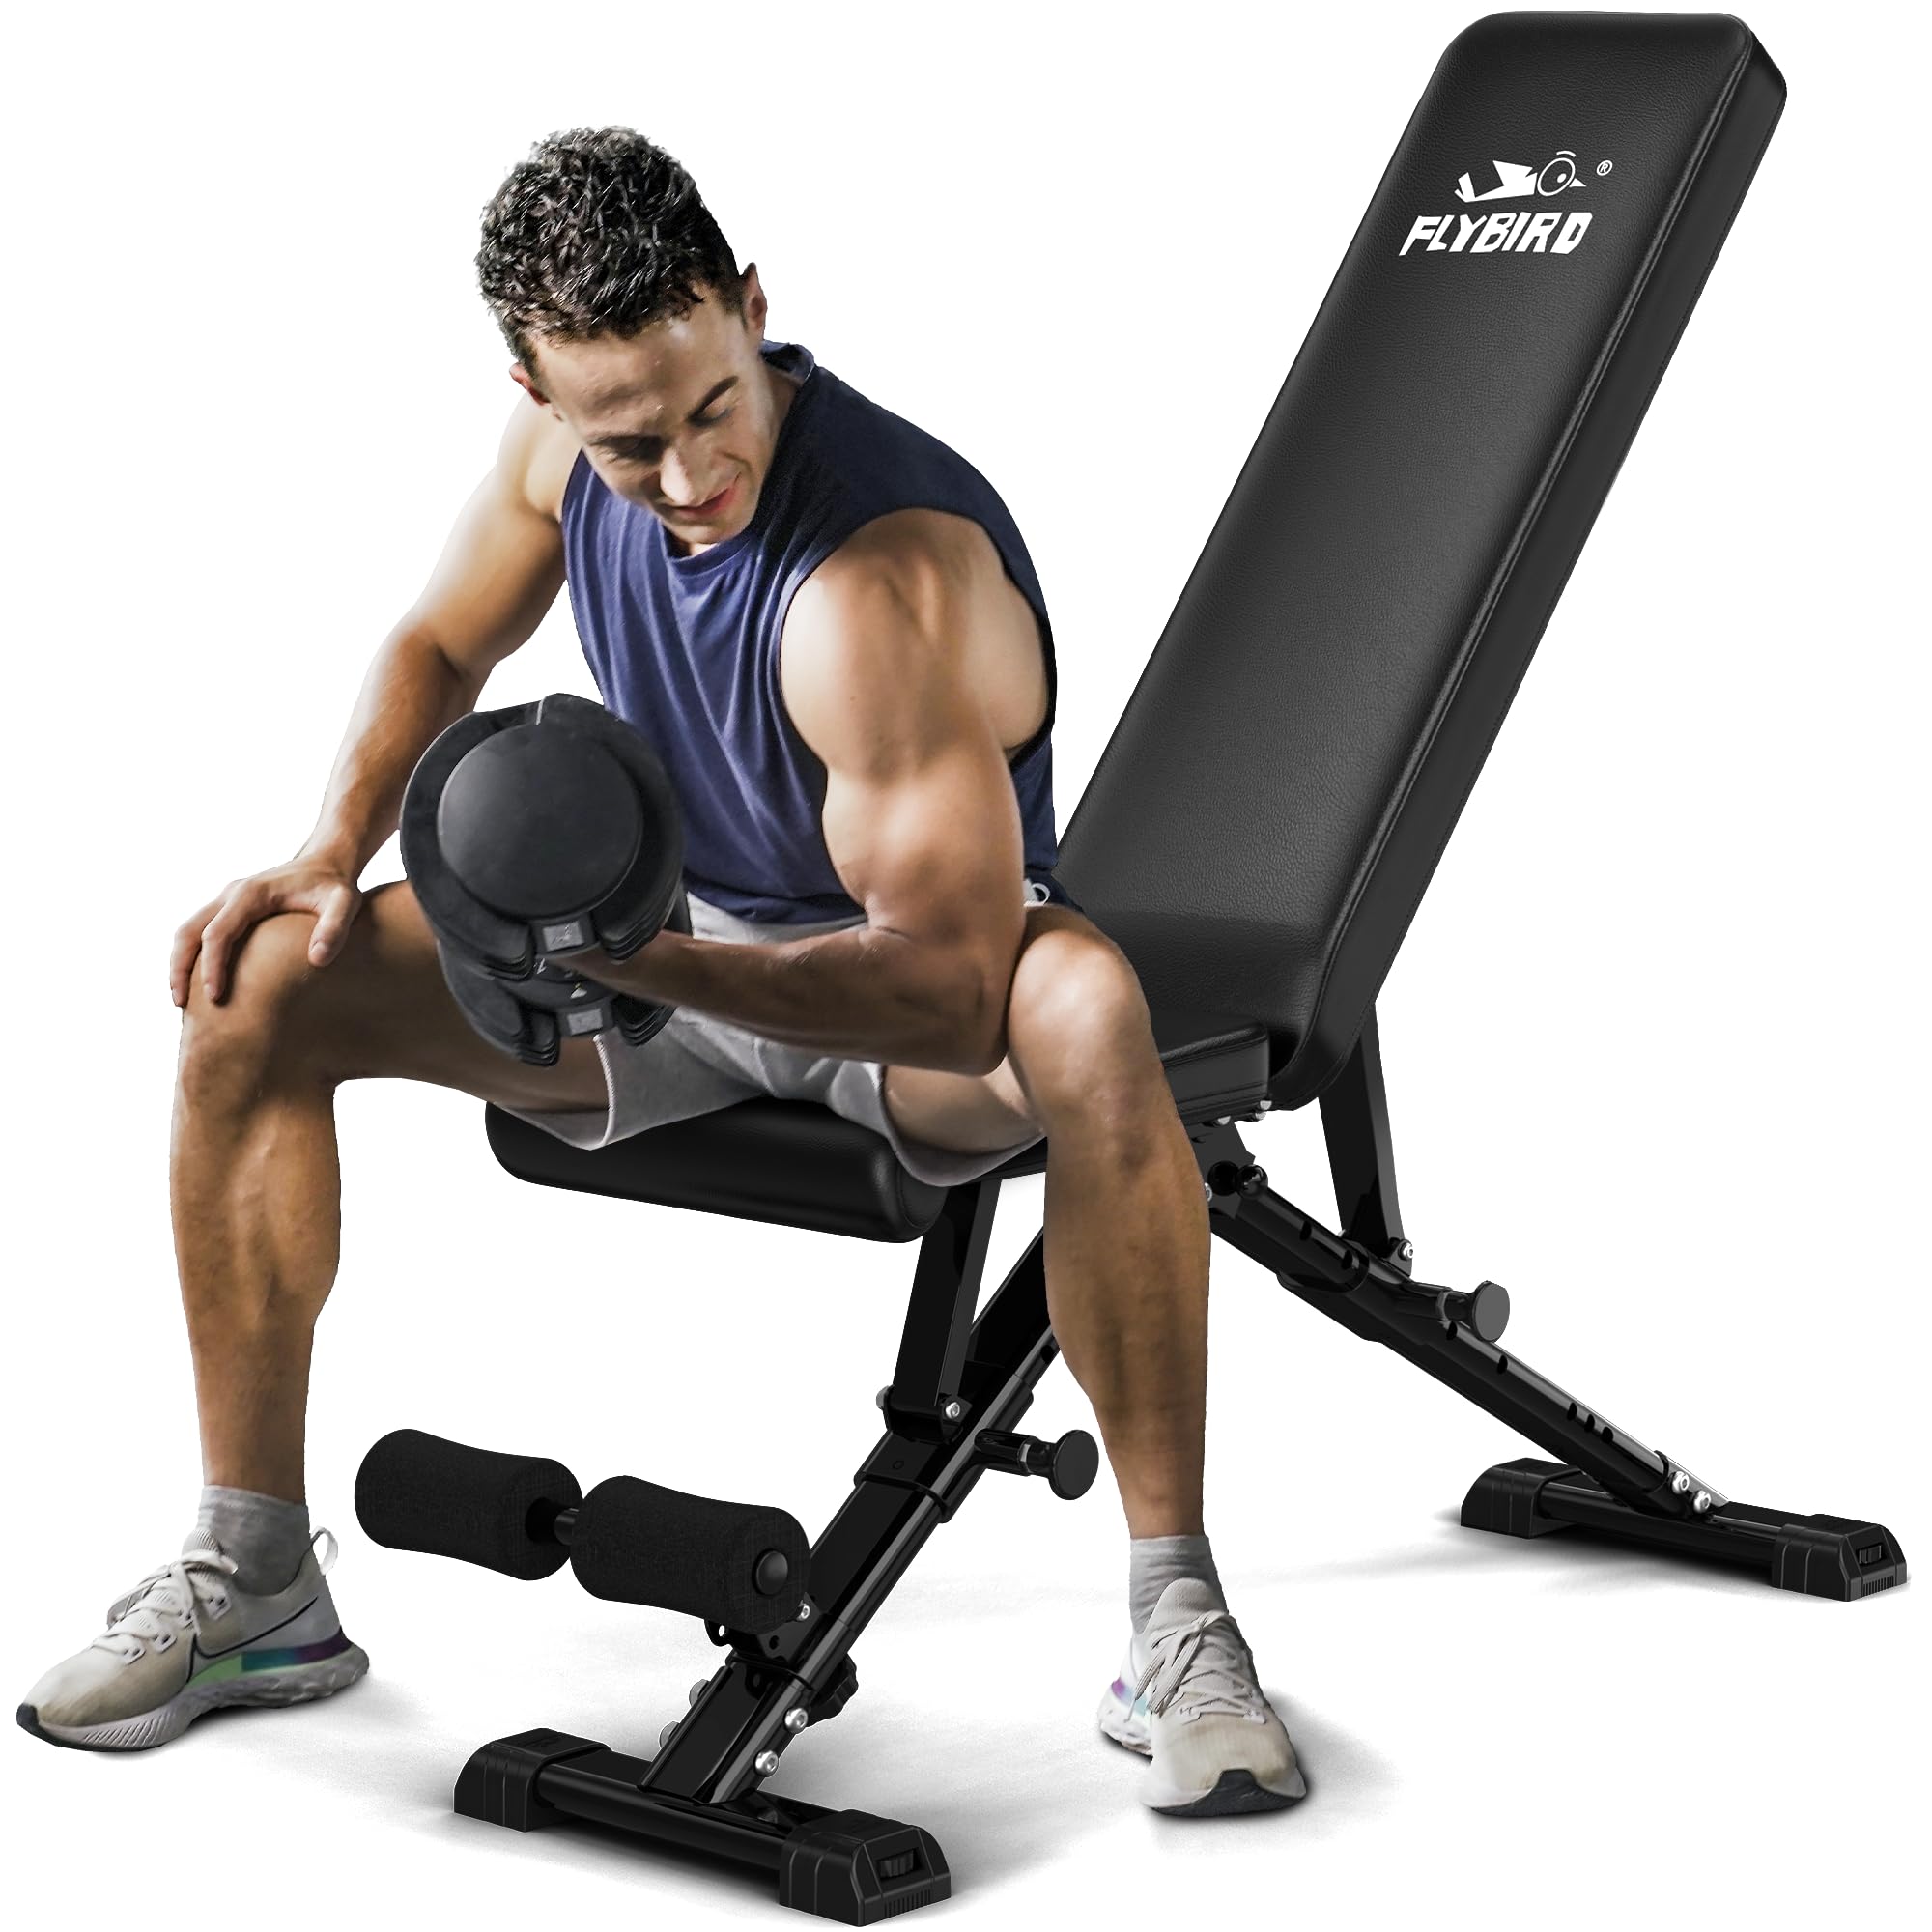 FLYBIRD Weight Bench Adjustable Strength Training Bench for Full Body Workout with Fast Folding-New Version